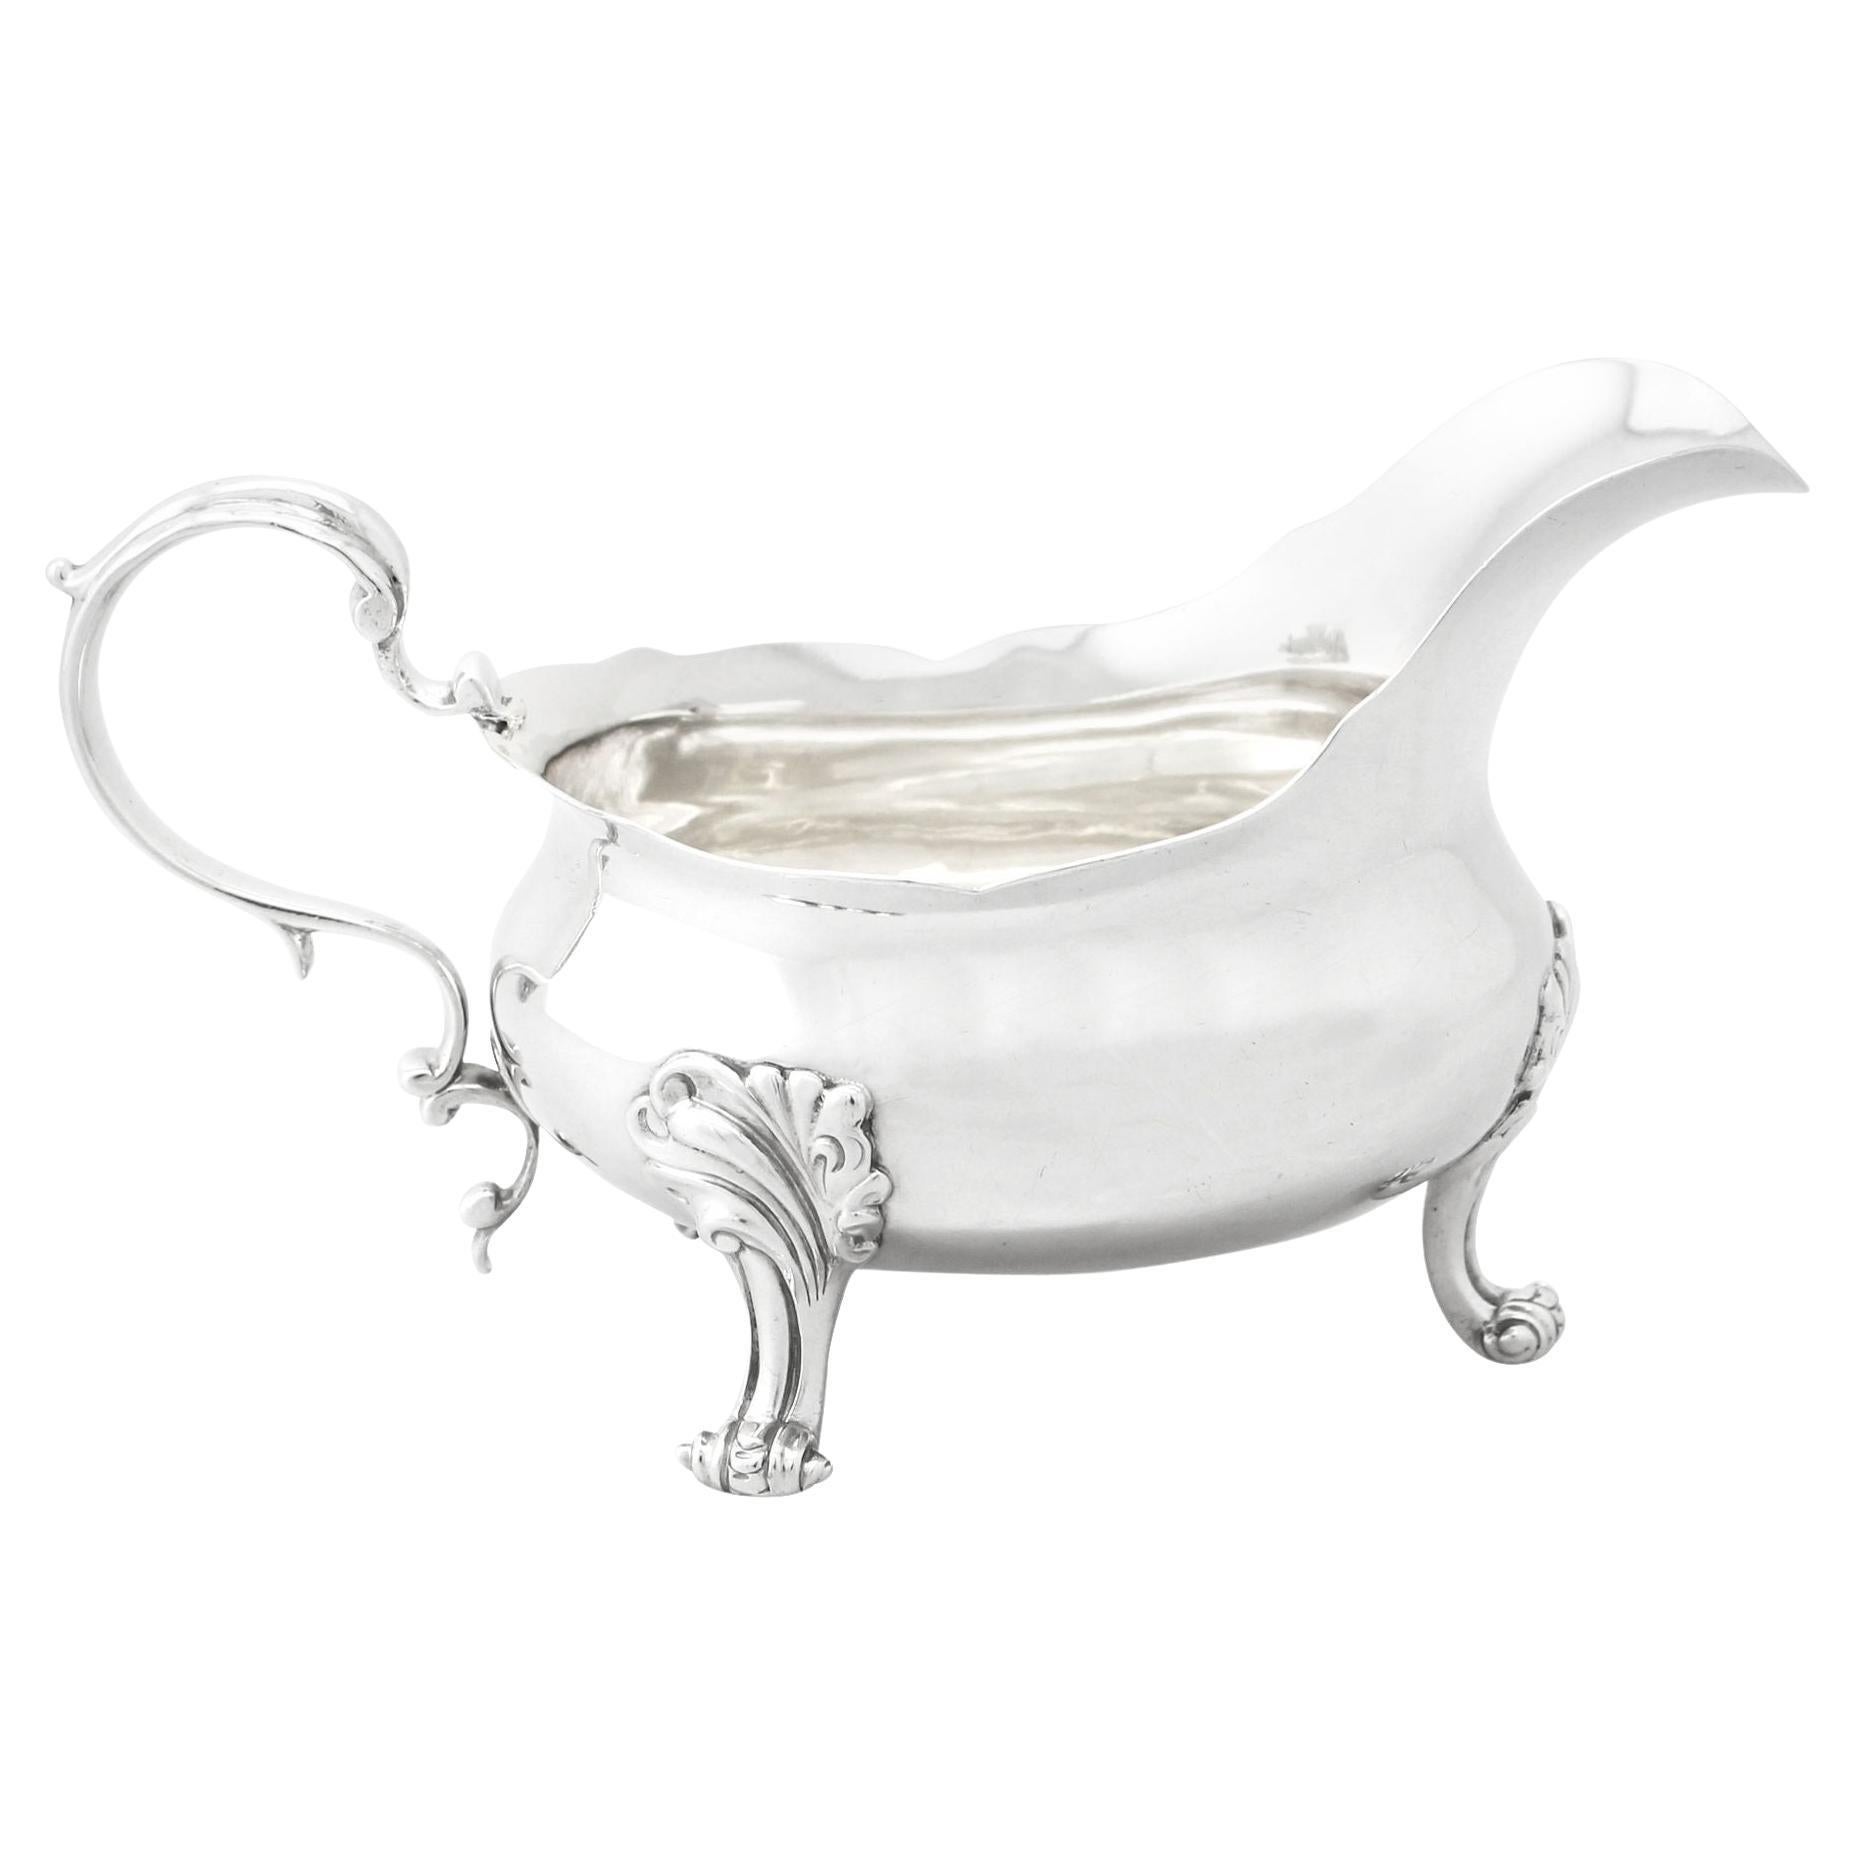 19th Century 1830 Sterling Silver Sauceboat or Gravy Boat